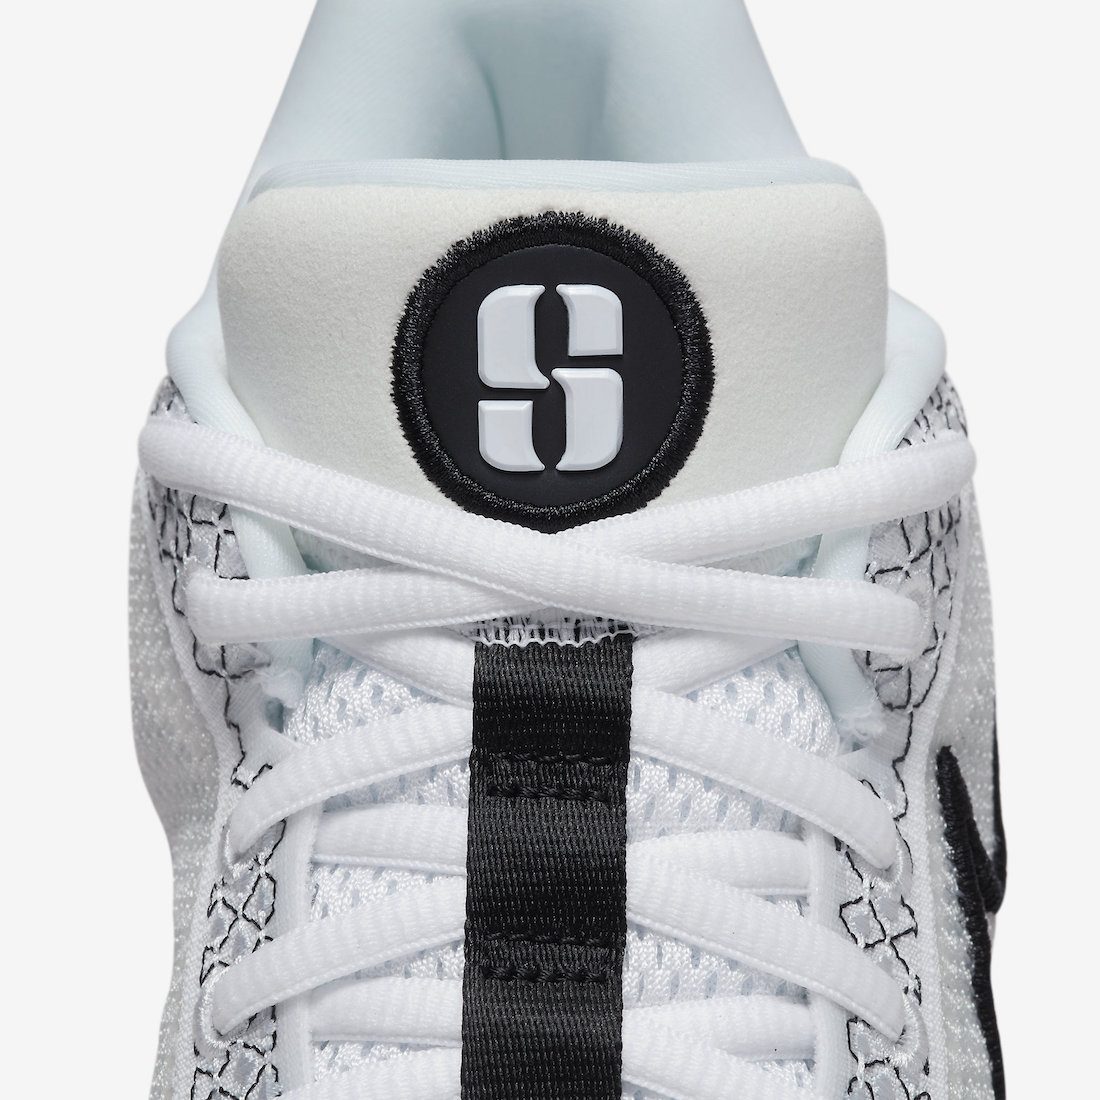 Nike Sabrina 1 Magnetic White Back FQ3381-103 release info date store lists pricing official photos